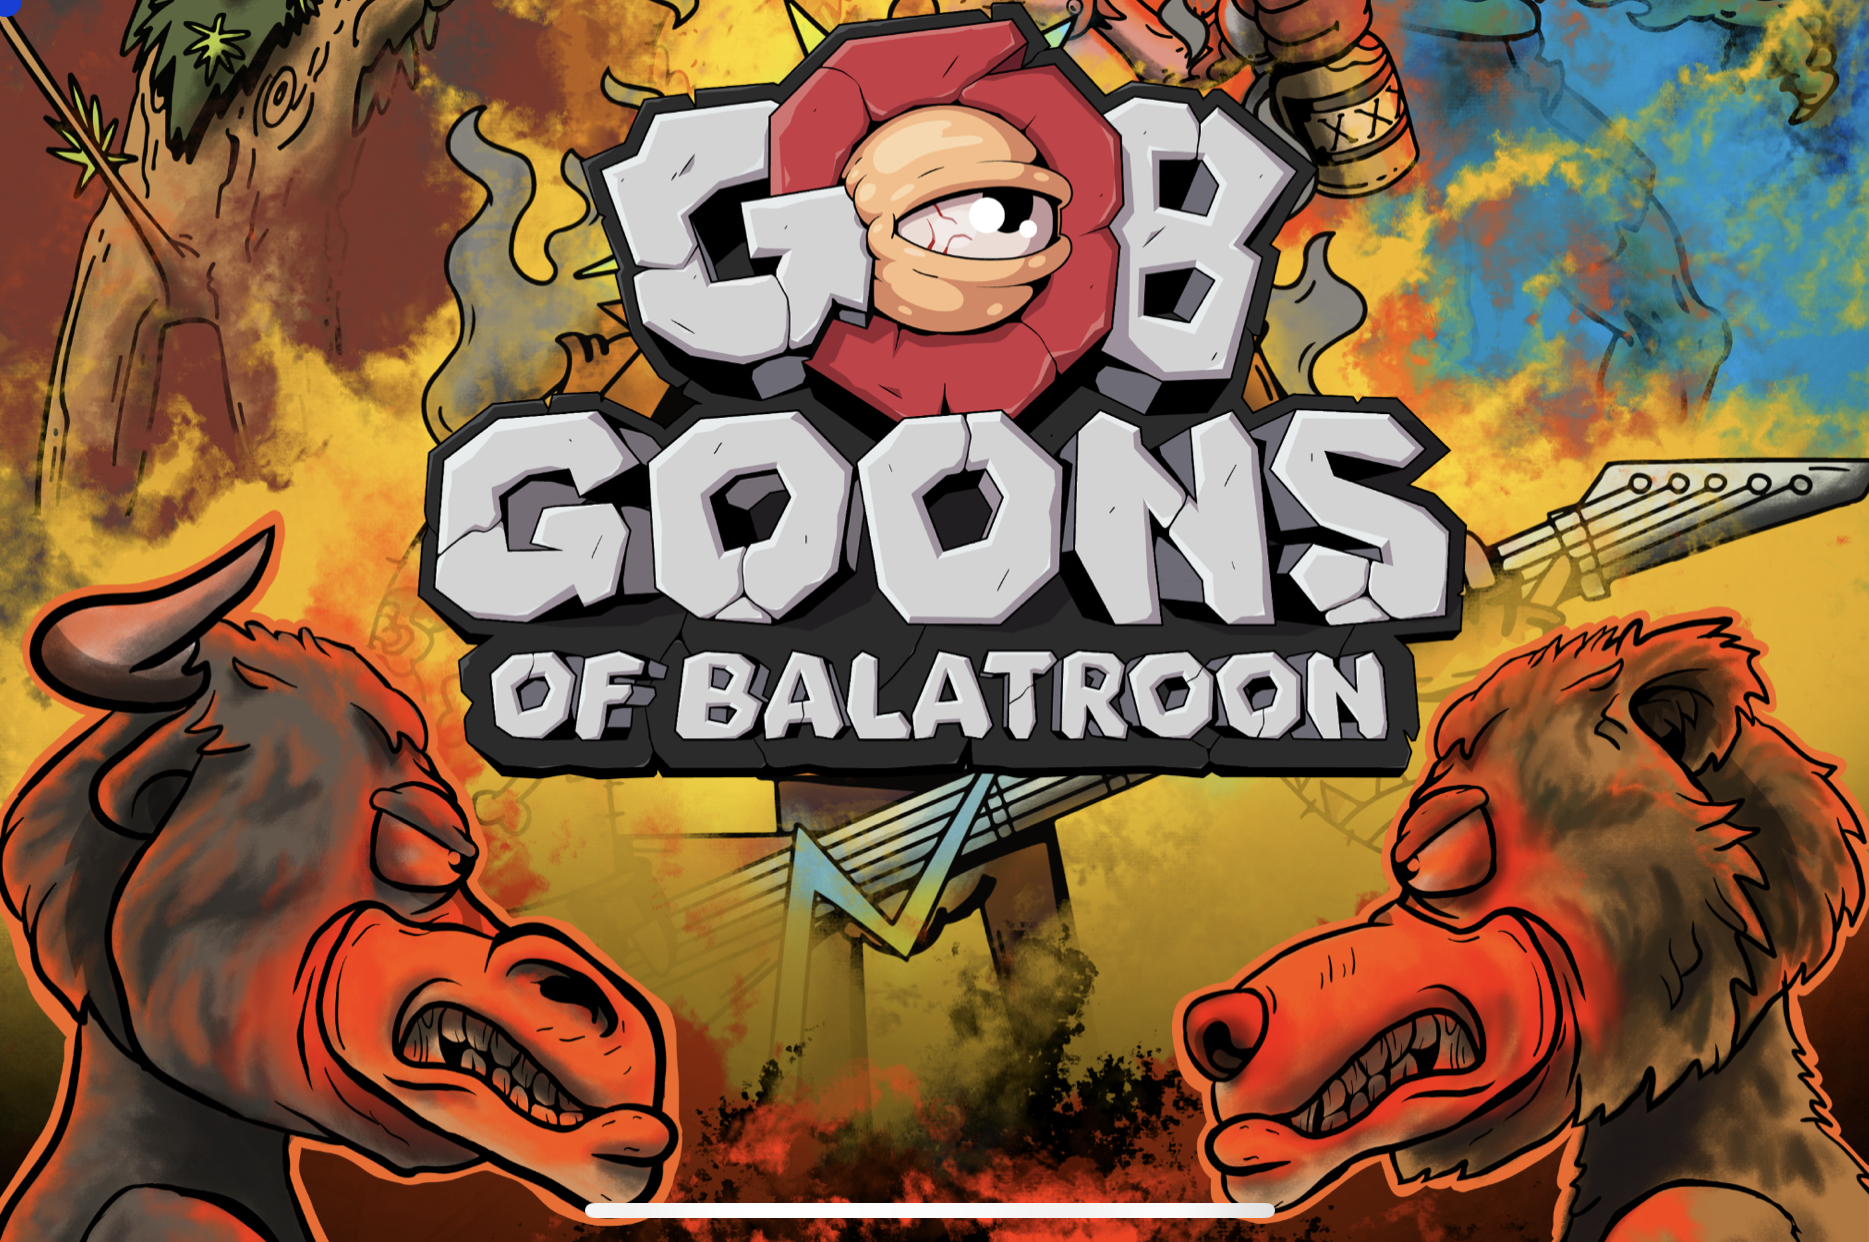 NFT Game Project 'Goons of Balatroon' Announces Genesis Goon Card Package 